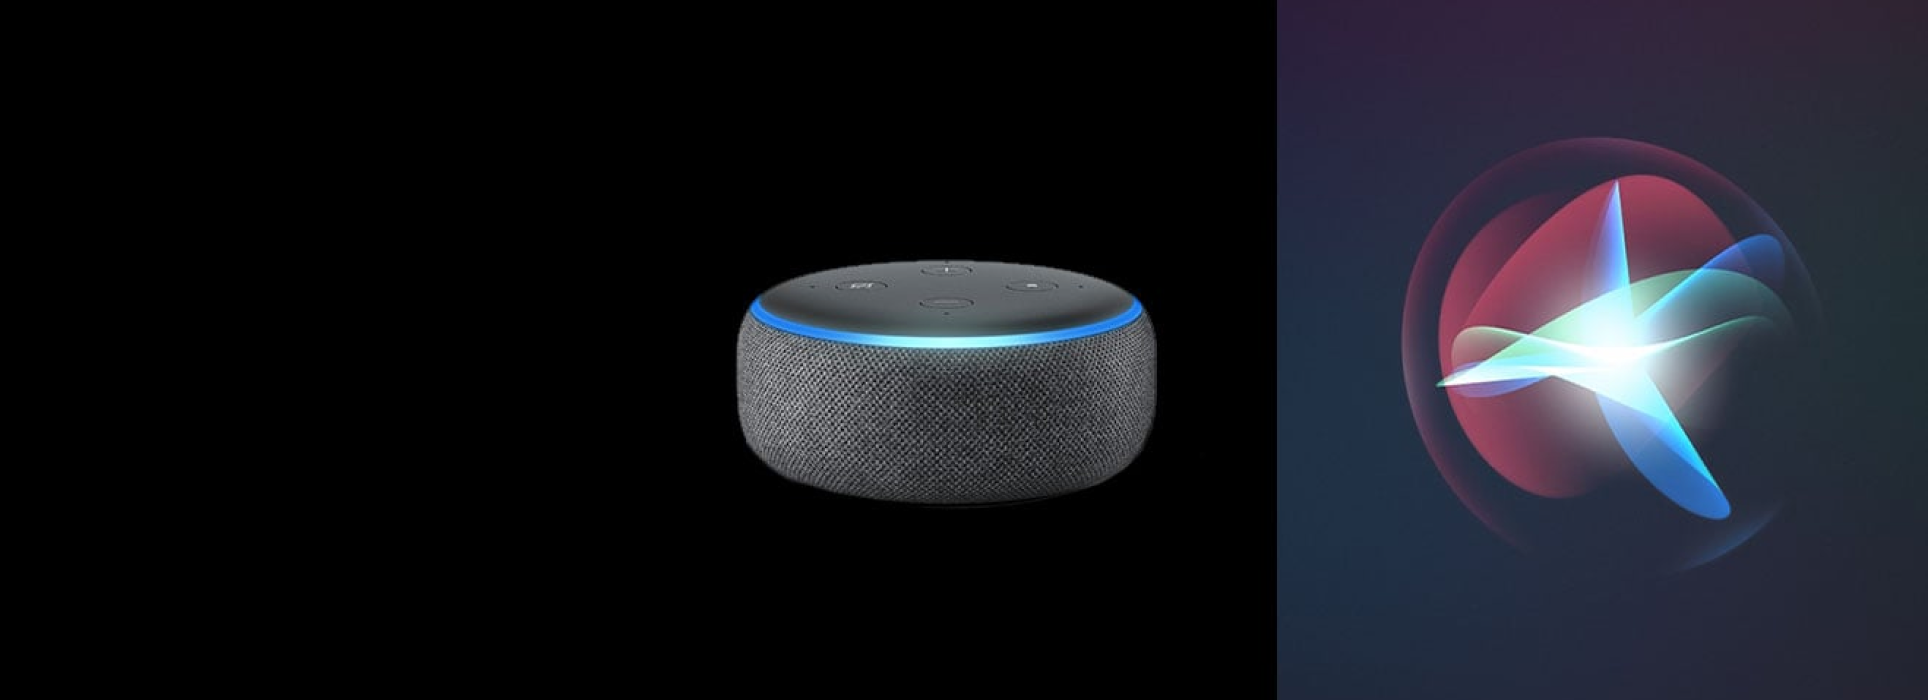 Who is the best assistant? Siri or Alexa